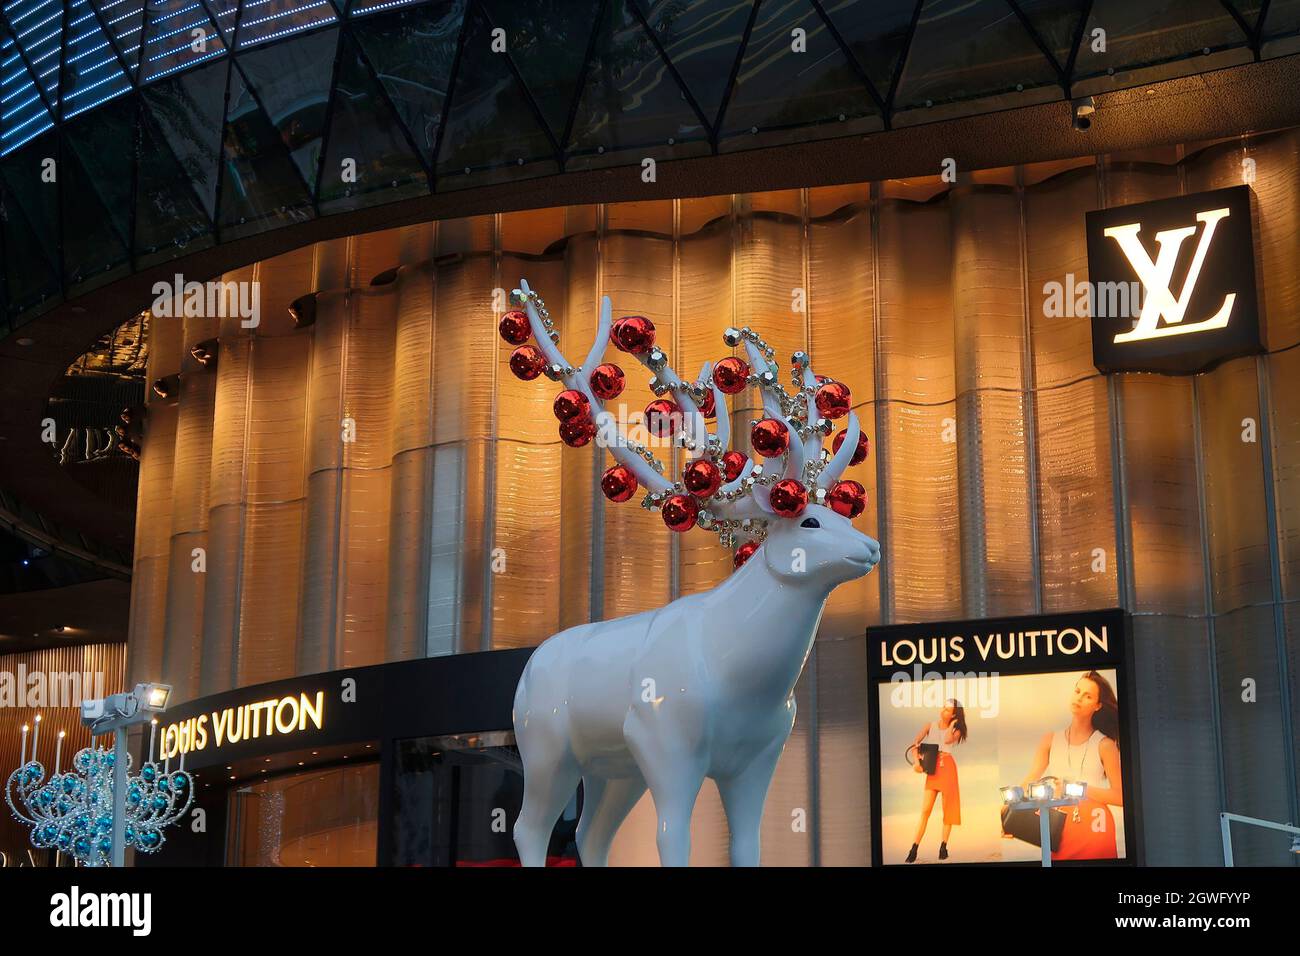 Louis Vuitton's pop-up installation of red striking shipping containers by  Virgil Abloh's idea, at ION Orchard, Singapore Stock Photo - Alamy